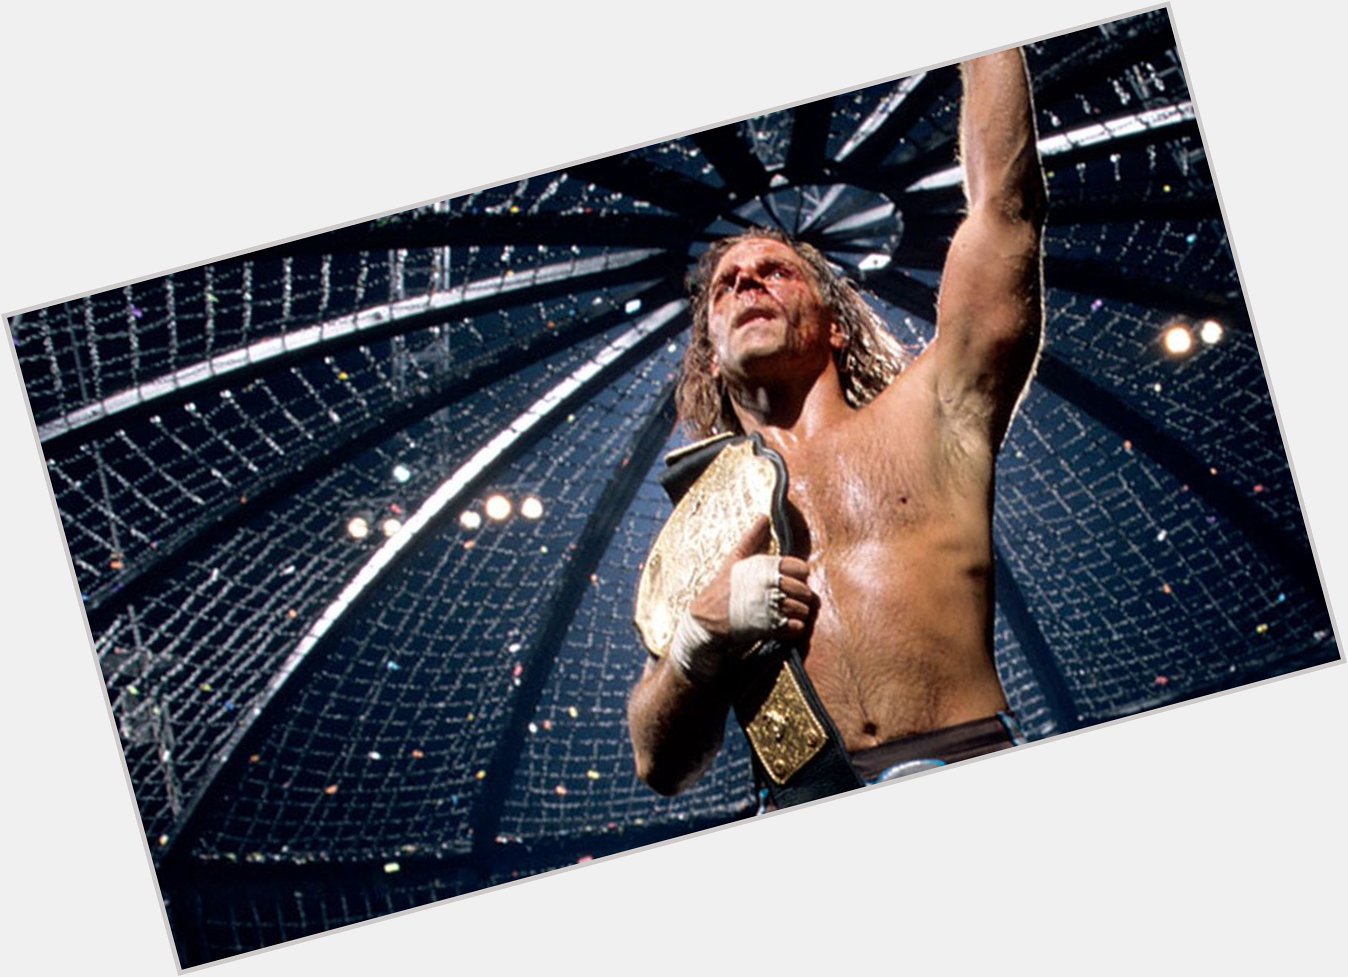 CagesideSeats This Day in Wrestling History (July 22): Happy Birthday Shawn Michaels!  